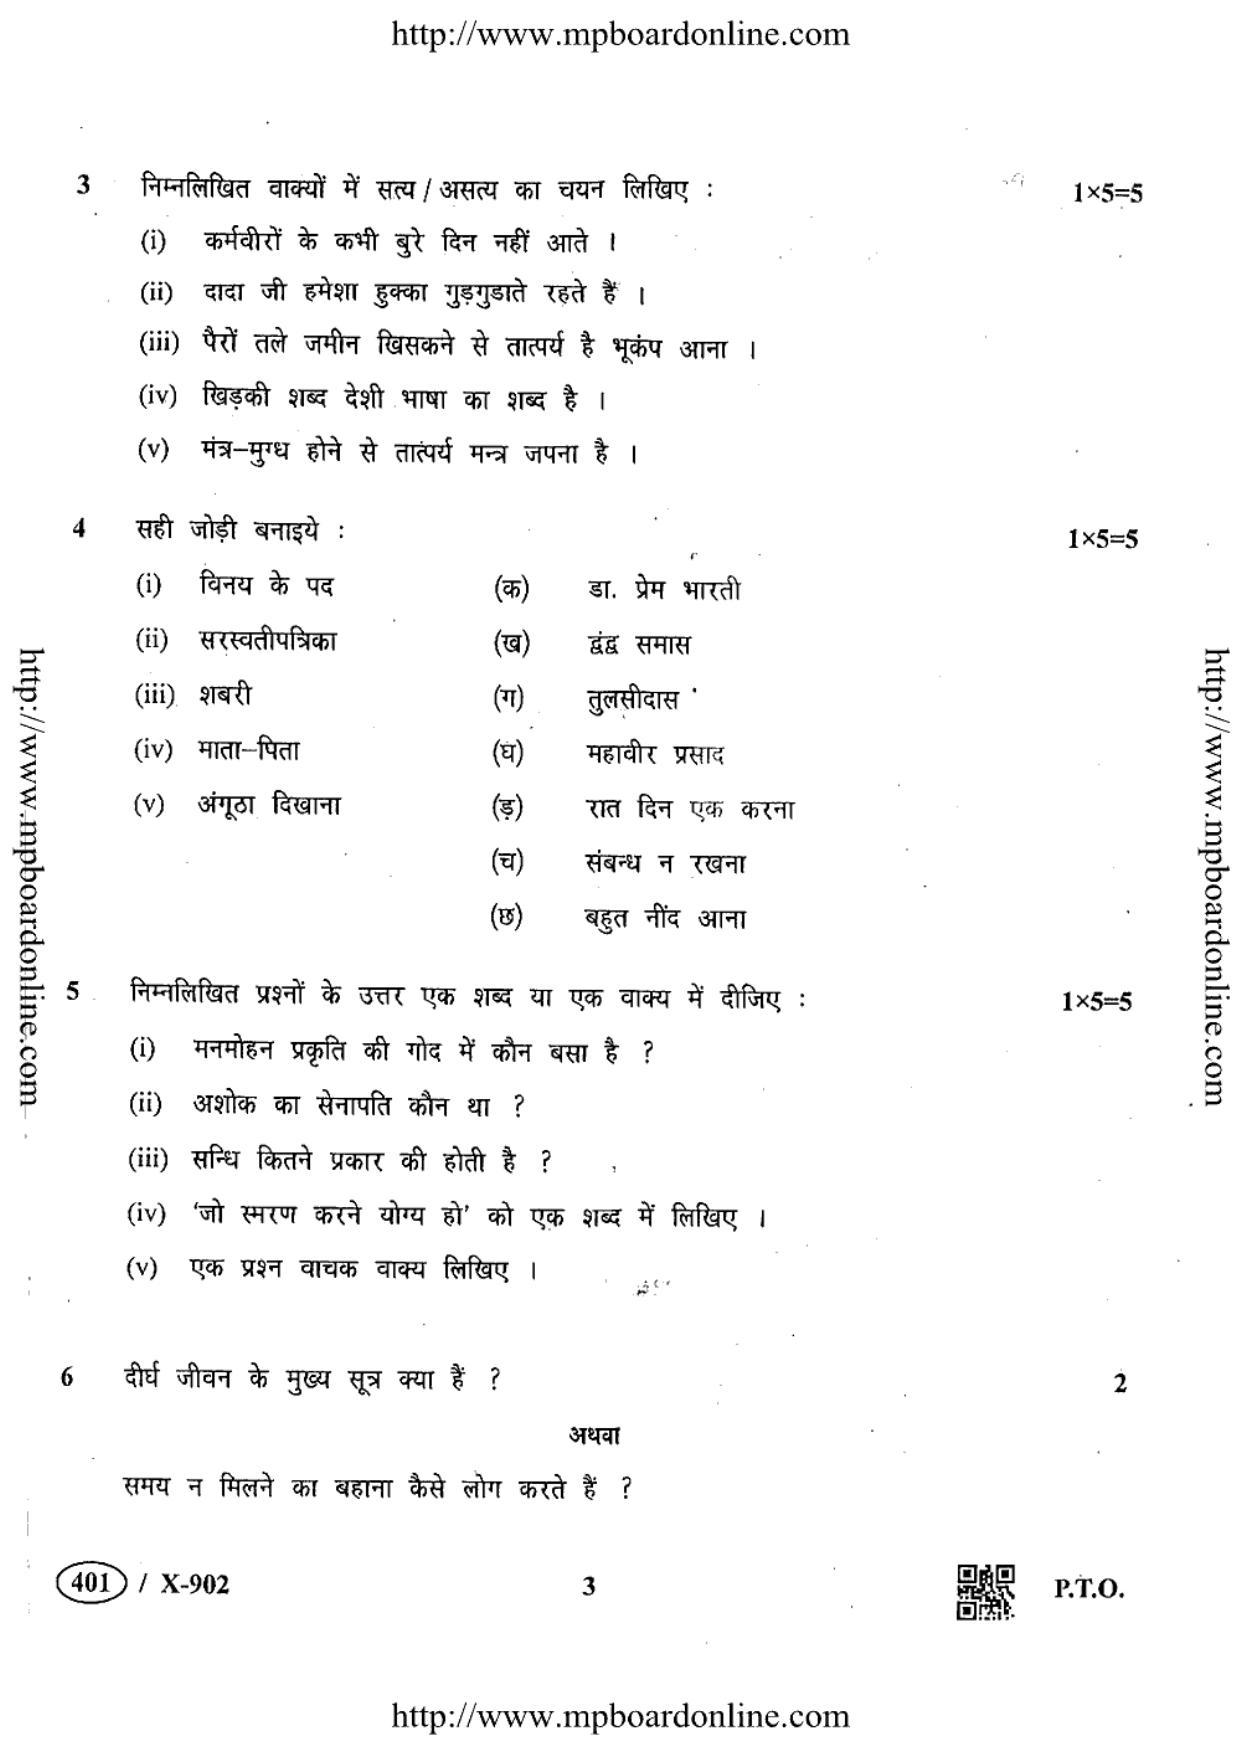 MP Board Class 10 Hindi General 2019 Question Paper - Page 3